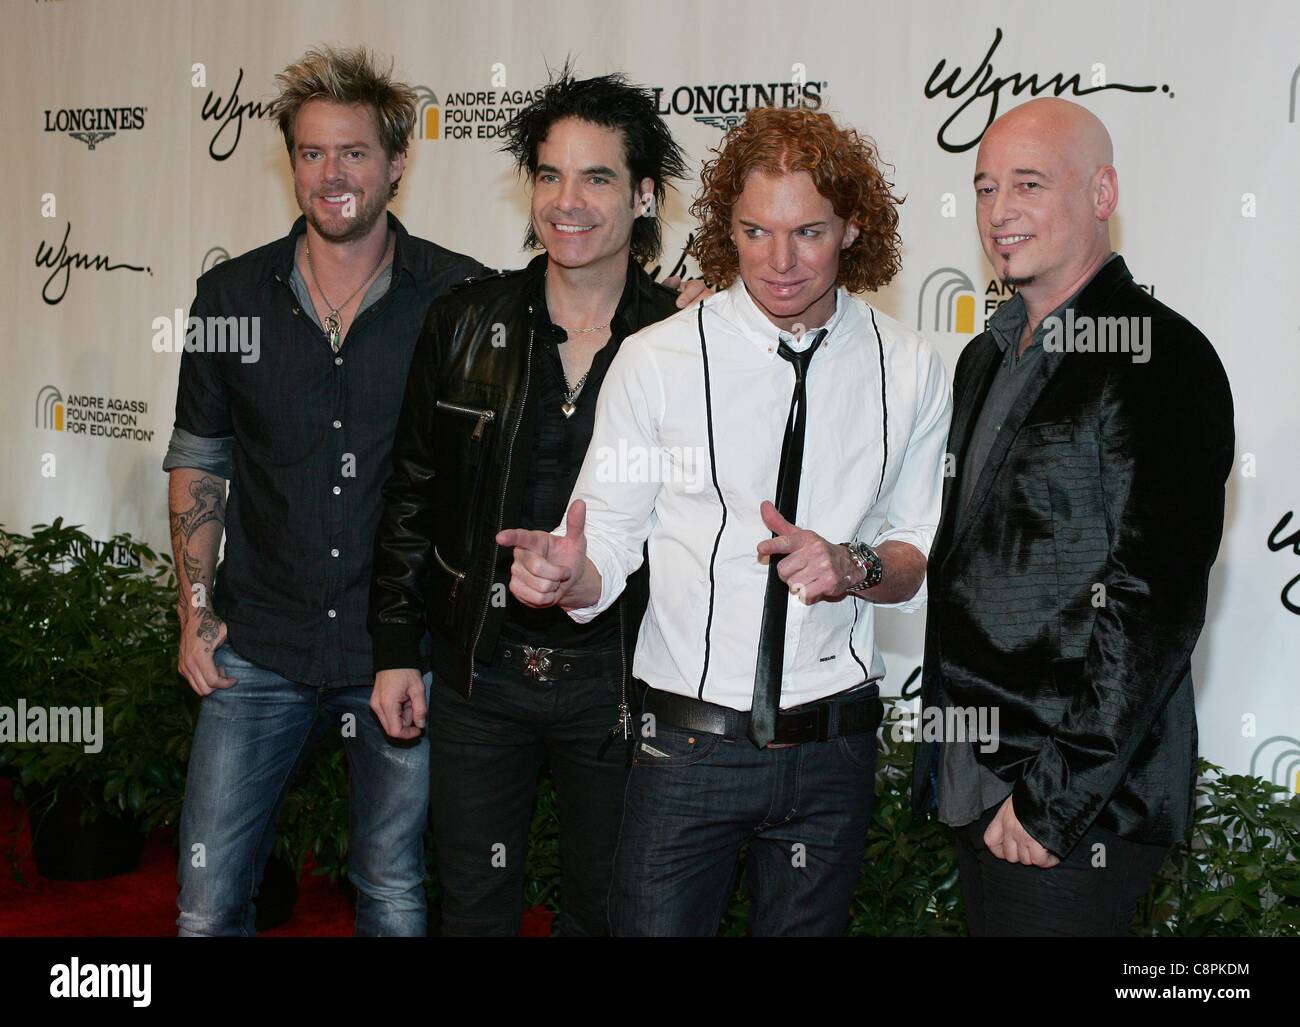 Train, Carrot Top at arrivals for 16th Andre Agassi Grand Slam for Children Benefit Concert, Wynn Las Vegas, Las Vegas, NV October 29, 2011. Photo By: James Atoa/Everett Collection Stock Photo